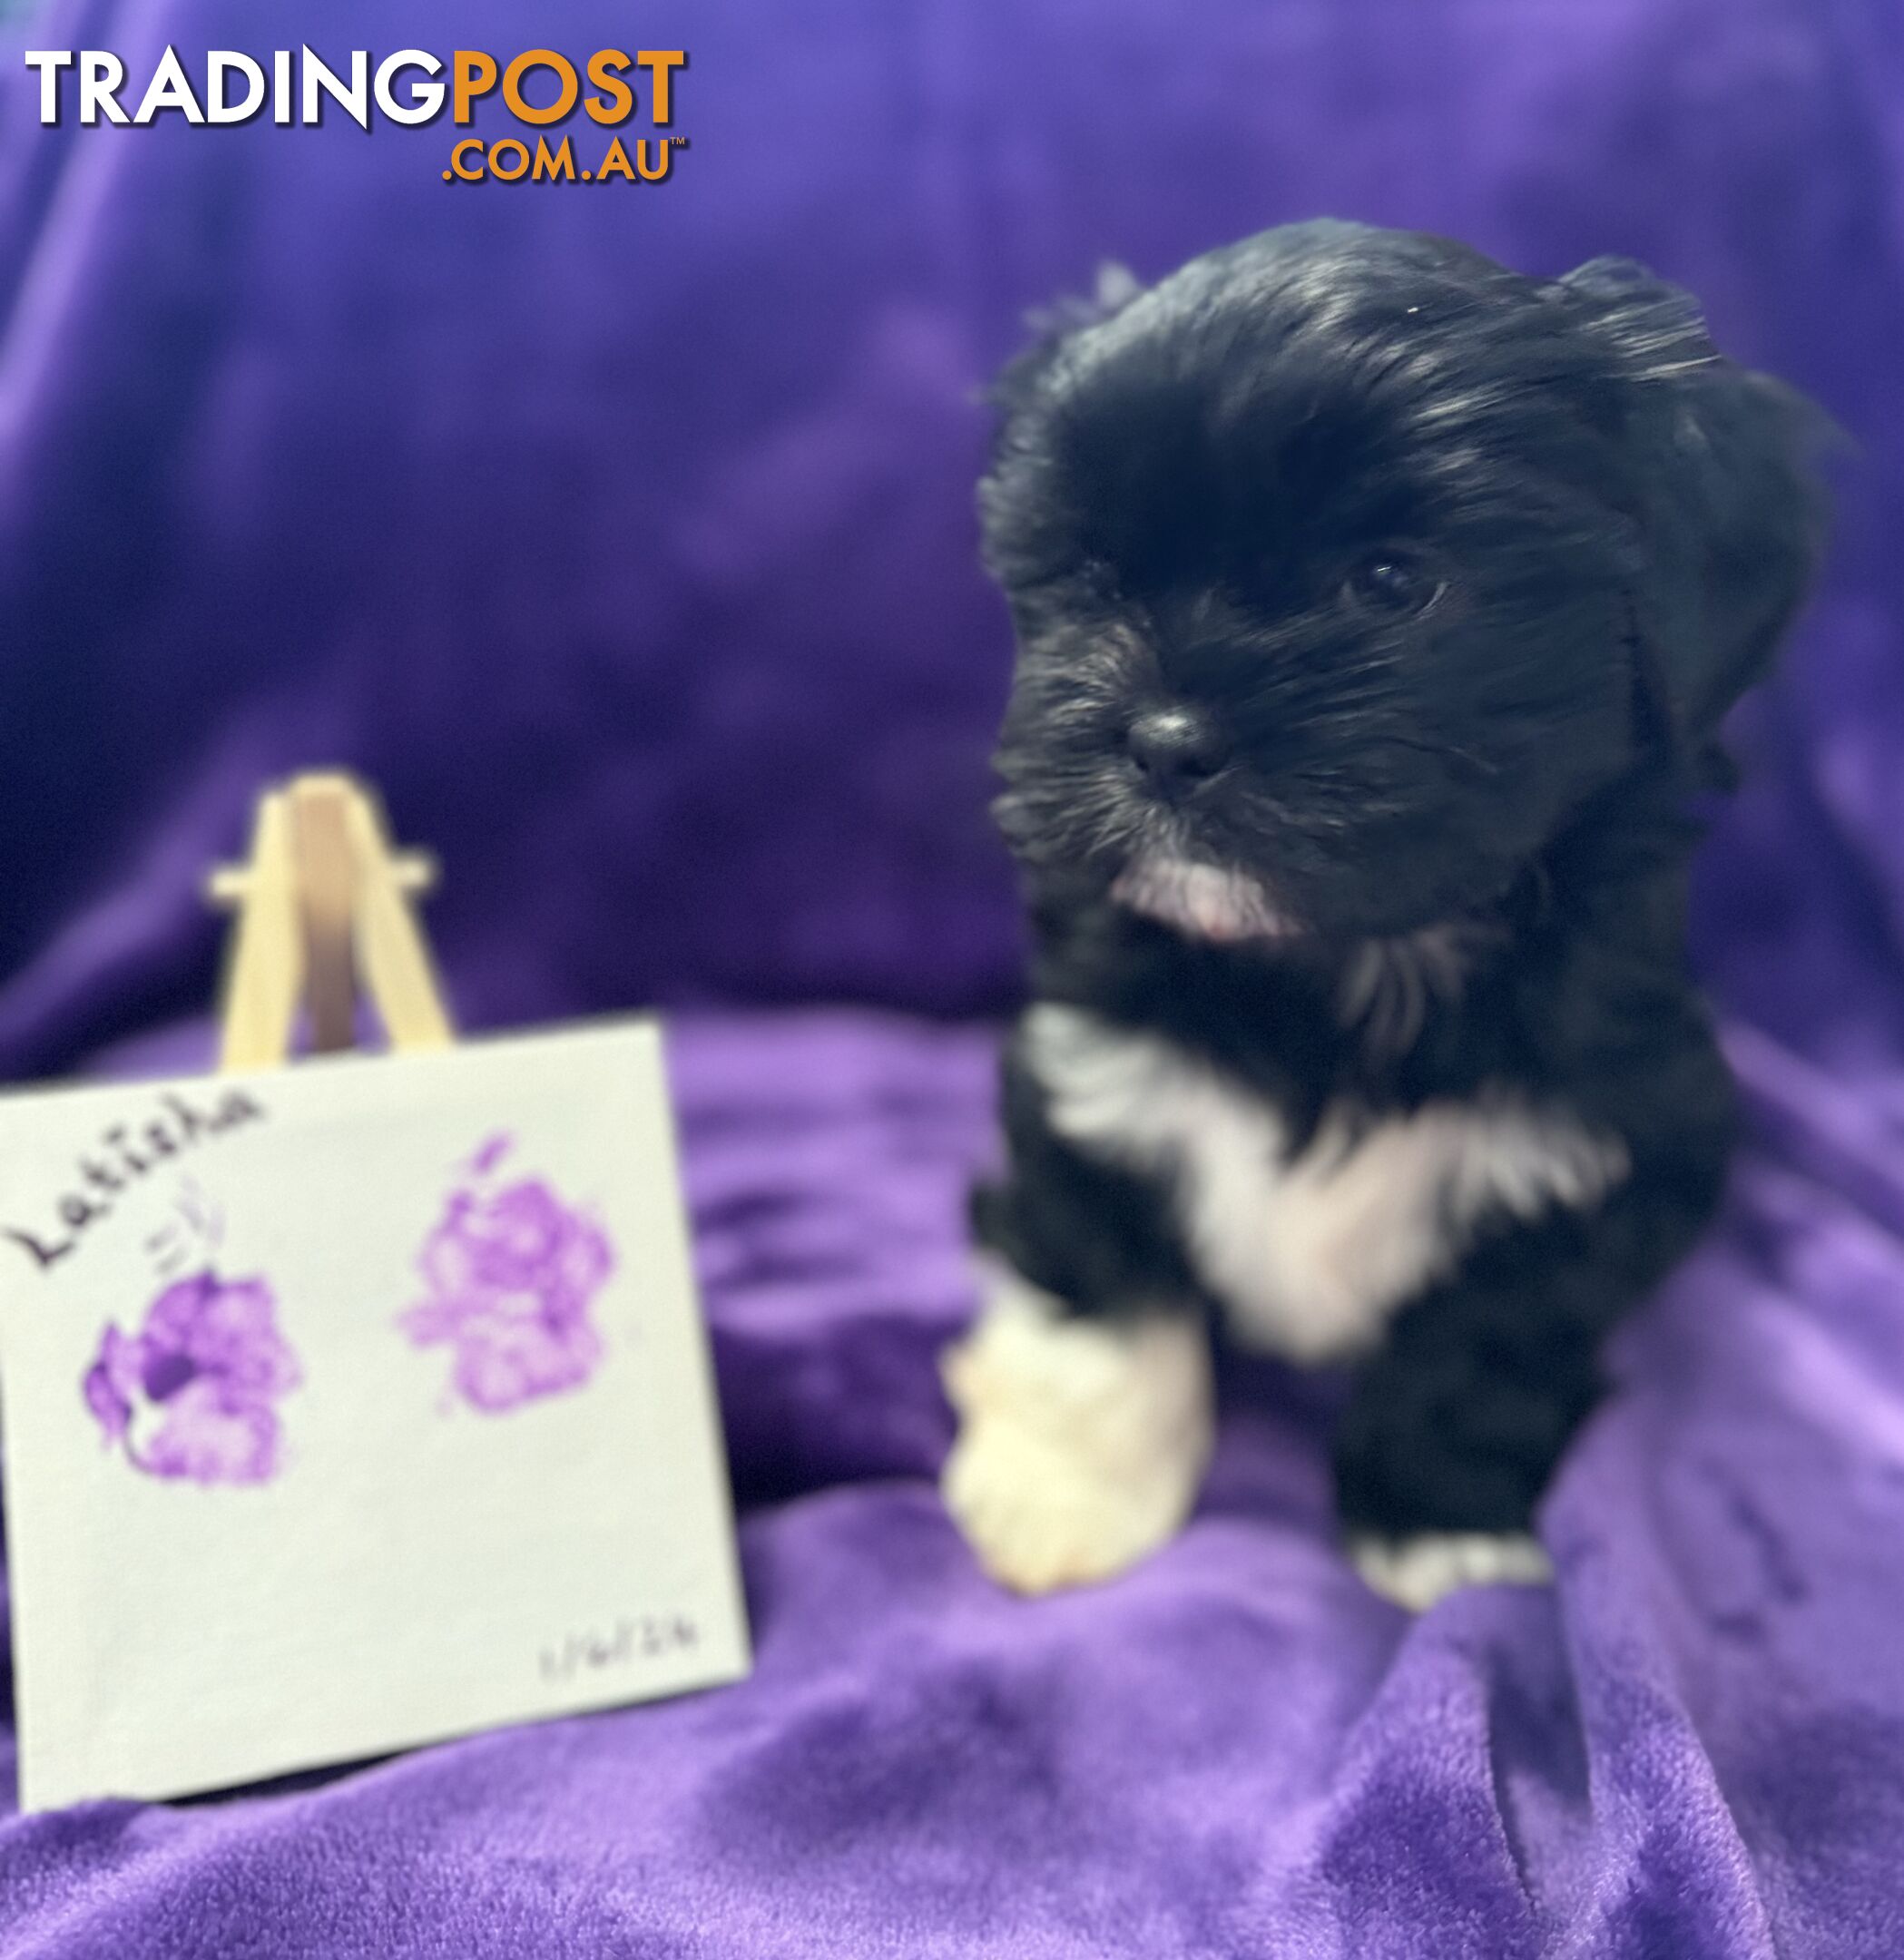 Purebred Lhasa Apso puppies registered breeder, toilet trained!